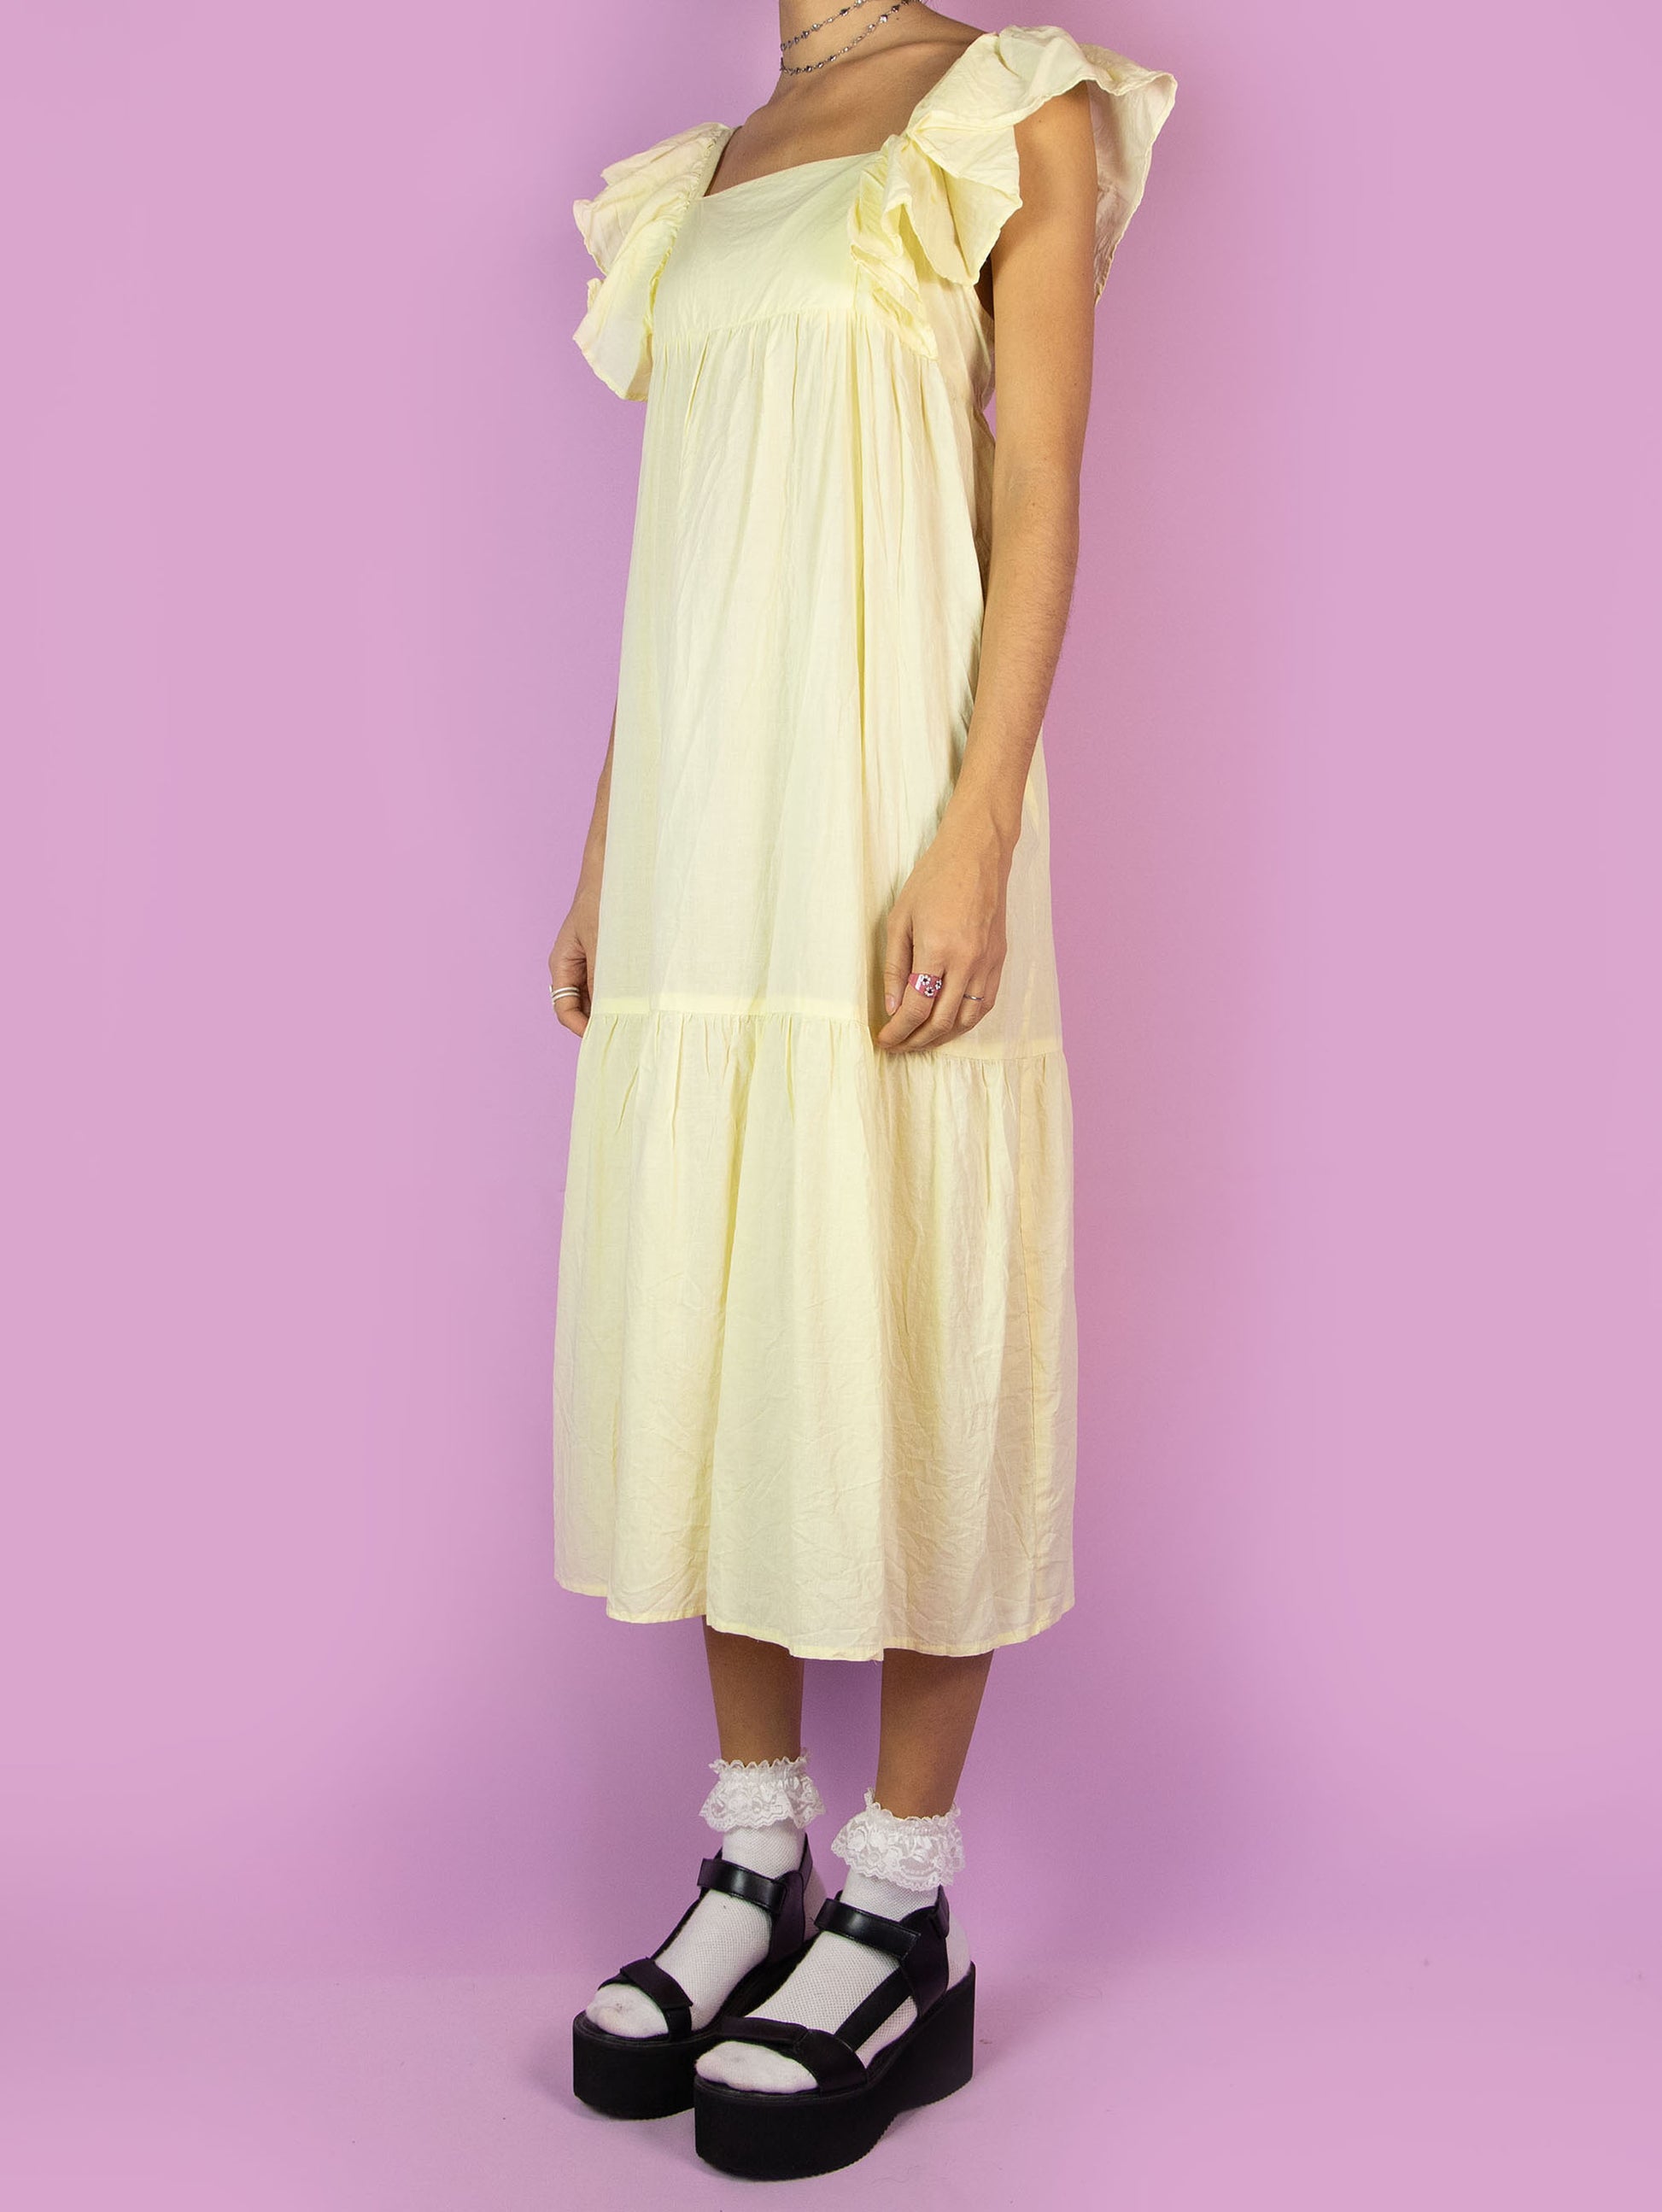 The Y2K Boho Tiered Midi Dress is a vintage light pastel yellow dress with a slightly transparent tiered design and ruffles on the straps. Summer 2000s beach cover up maxi dress.